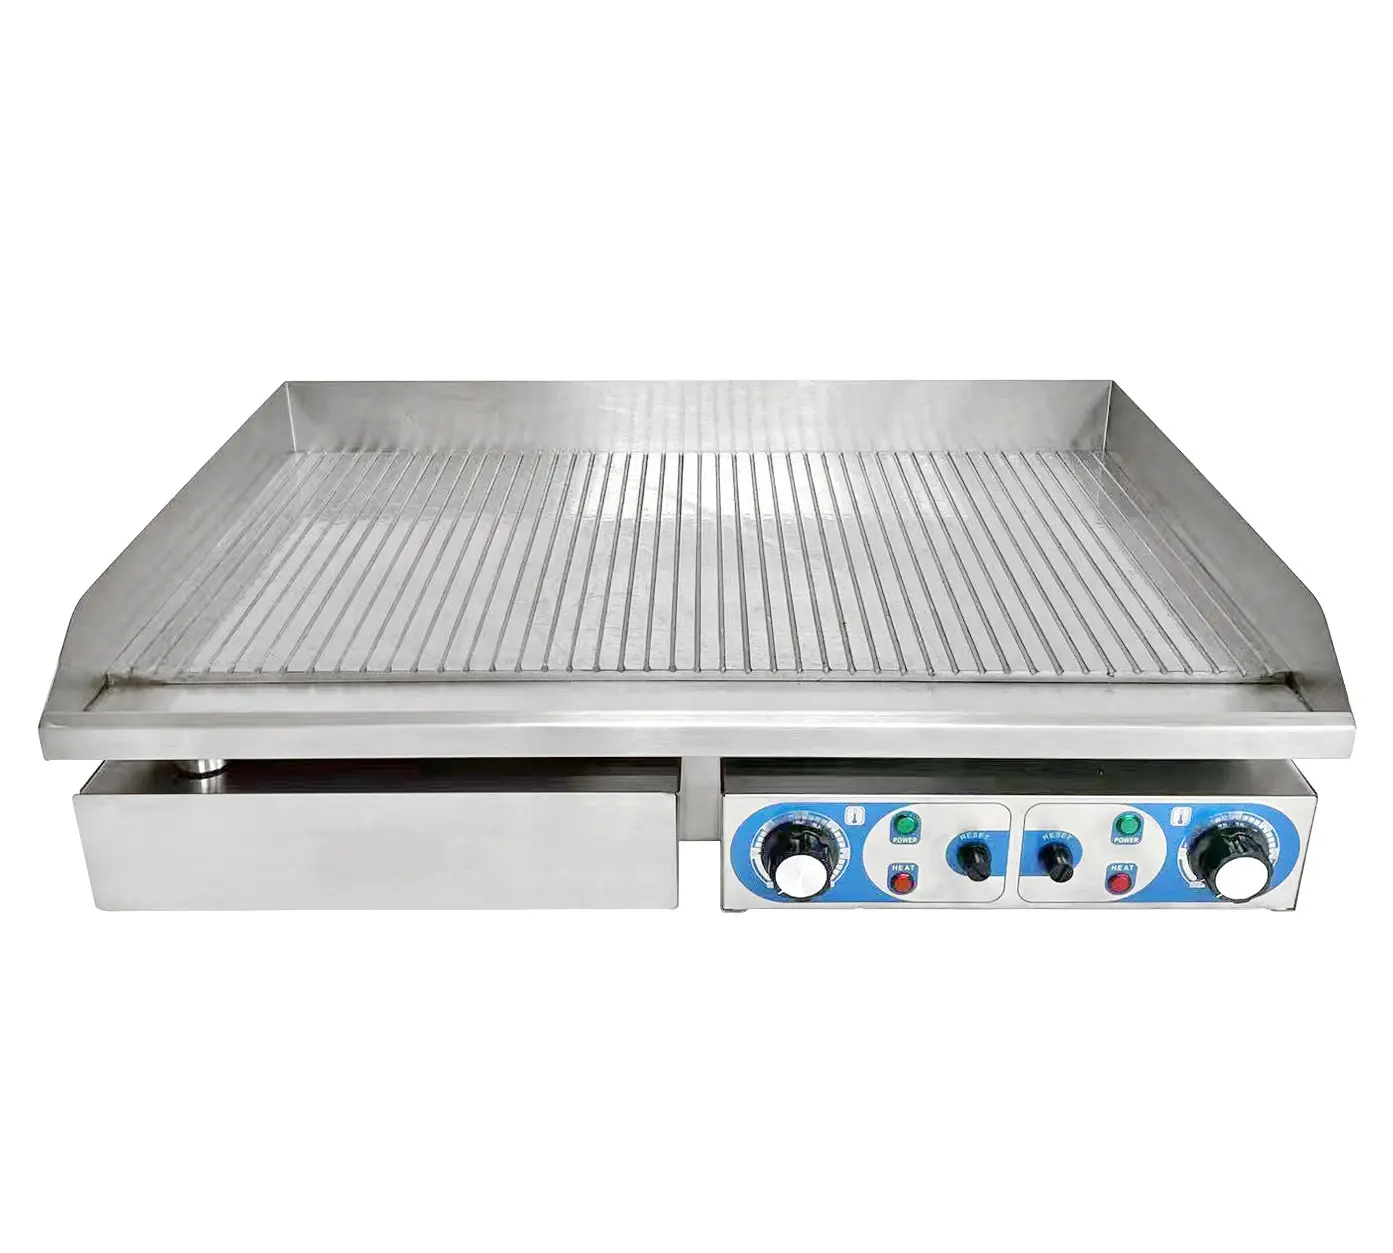 CE Certified Non-stick Stainless Steel Full Pit bbq Grill